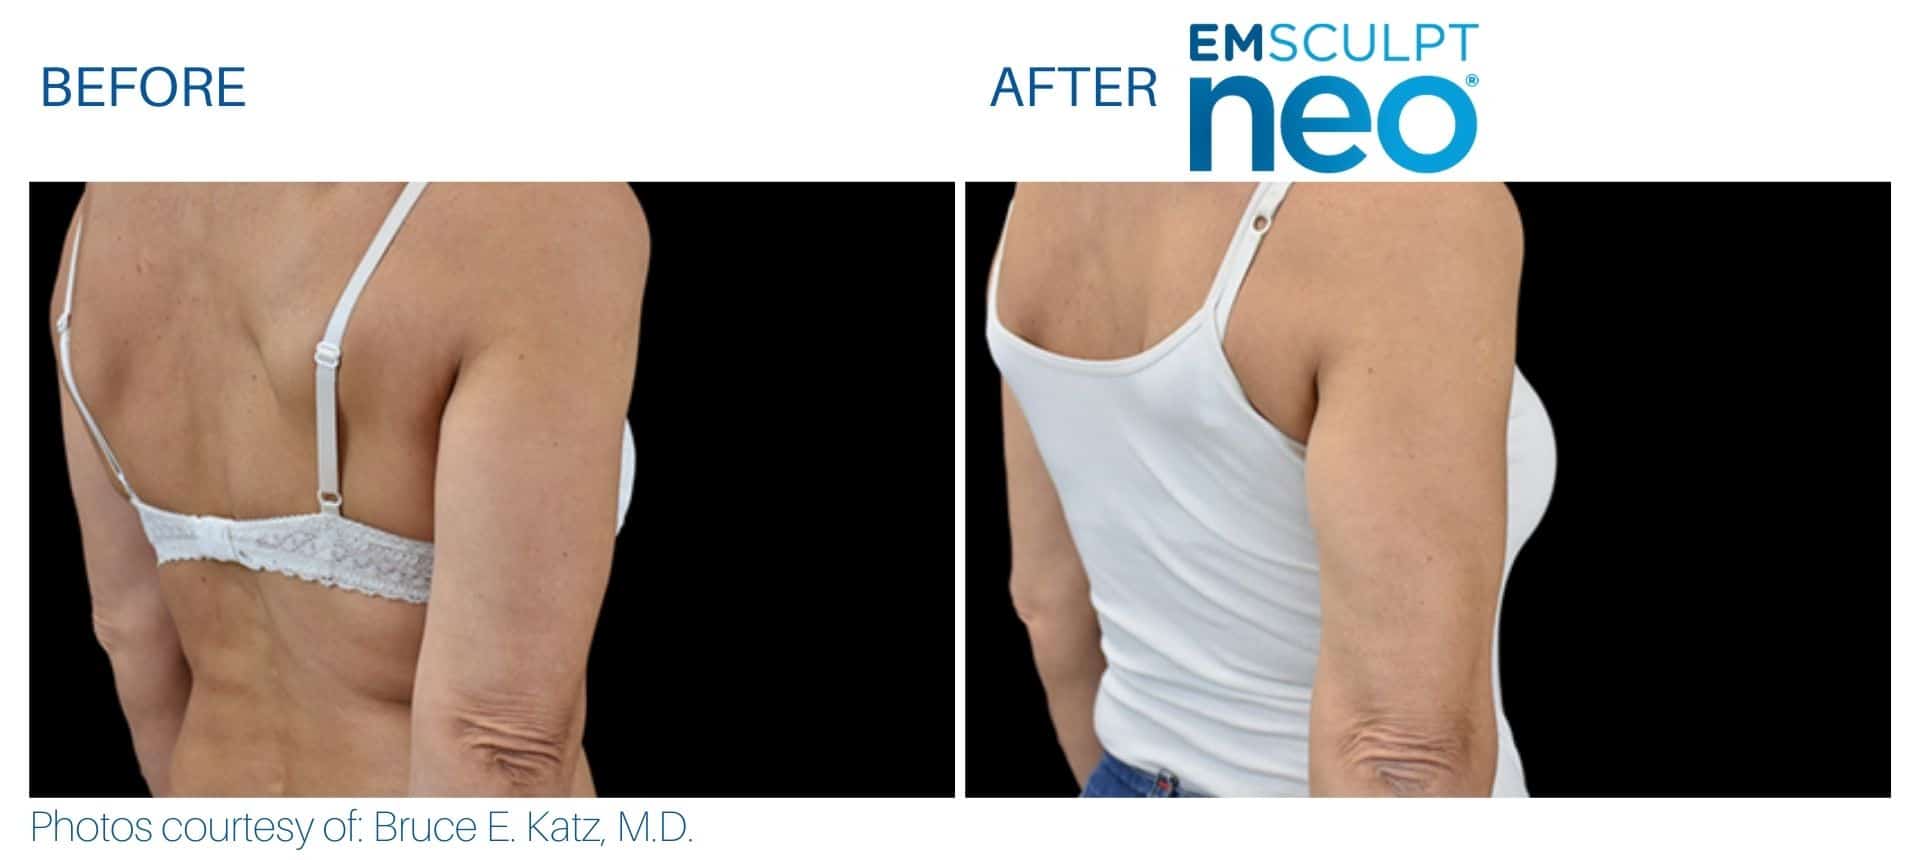 Emsculpt neo arms treatment before and after